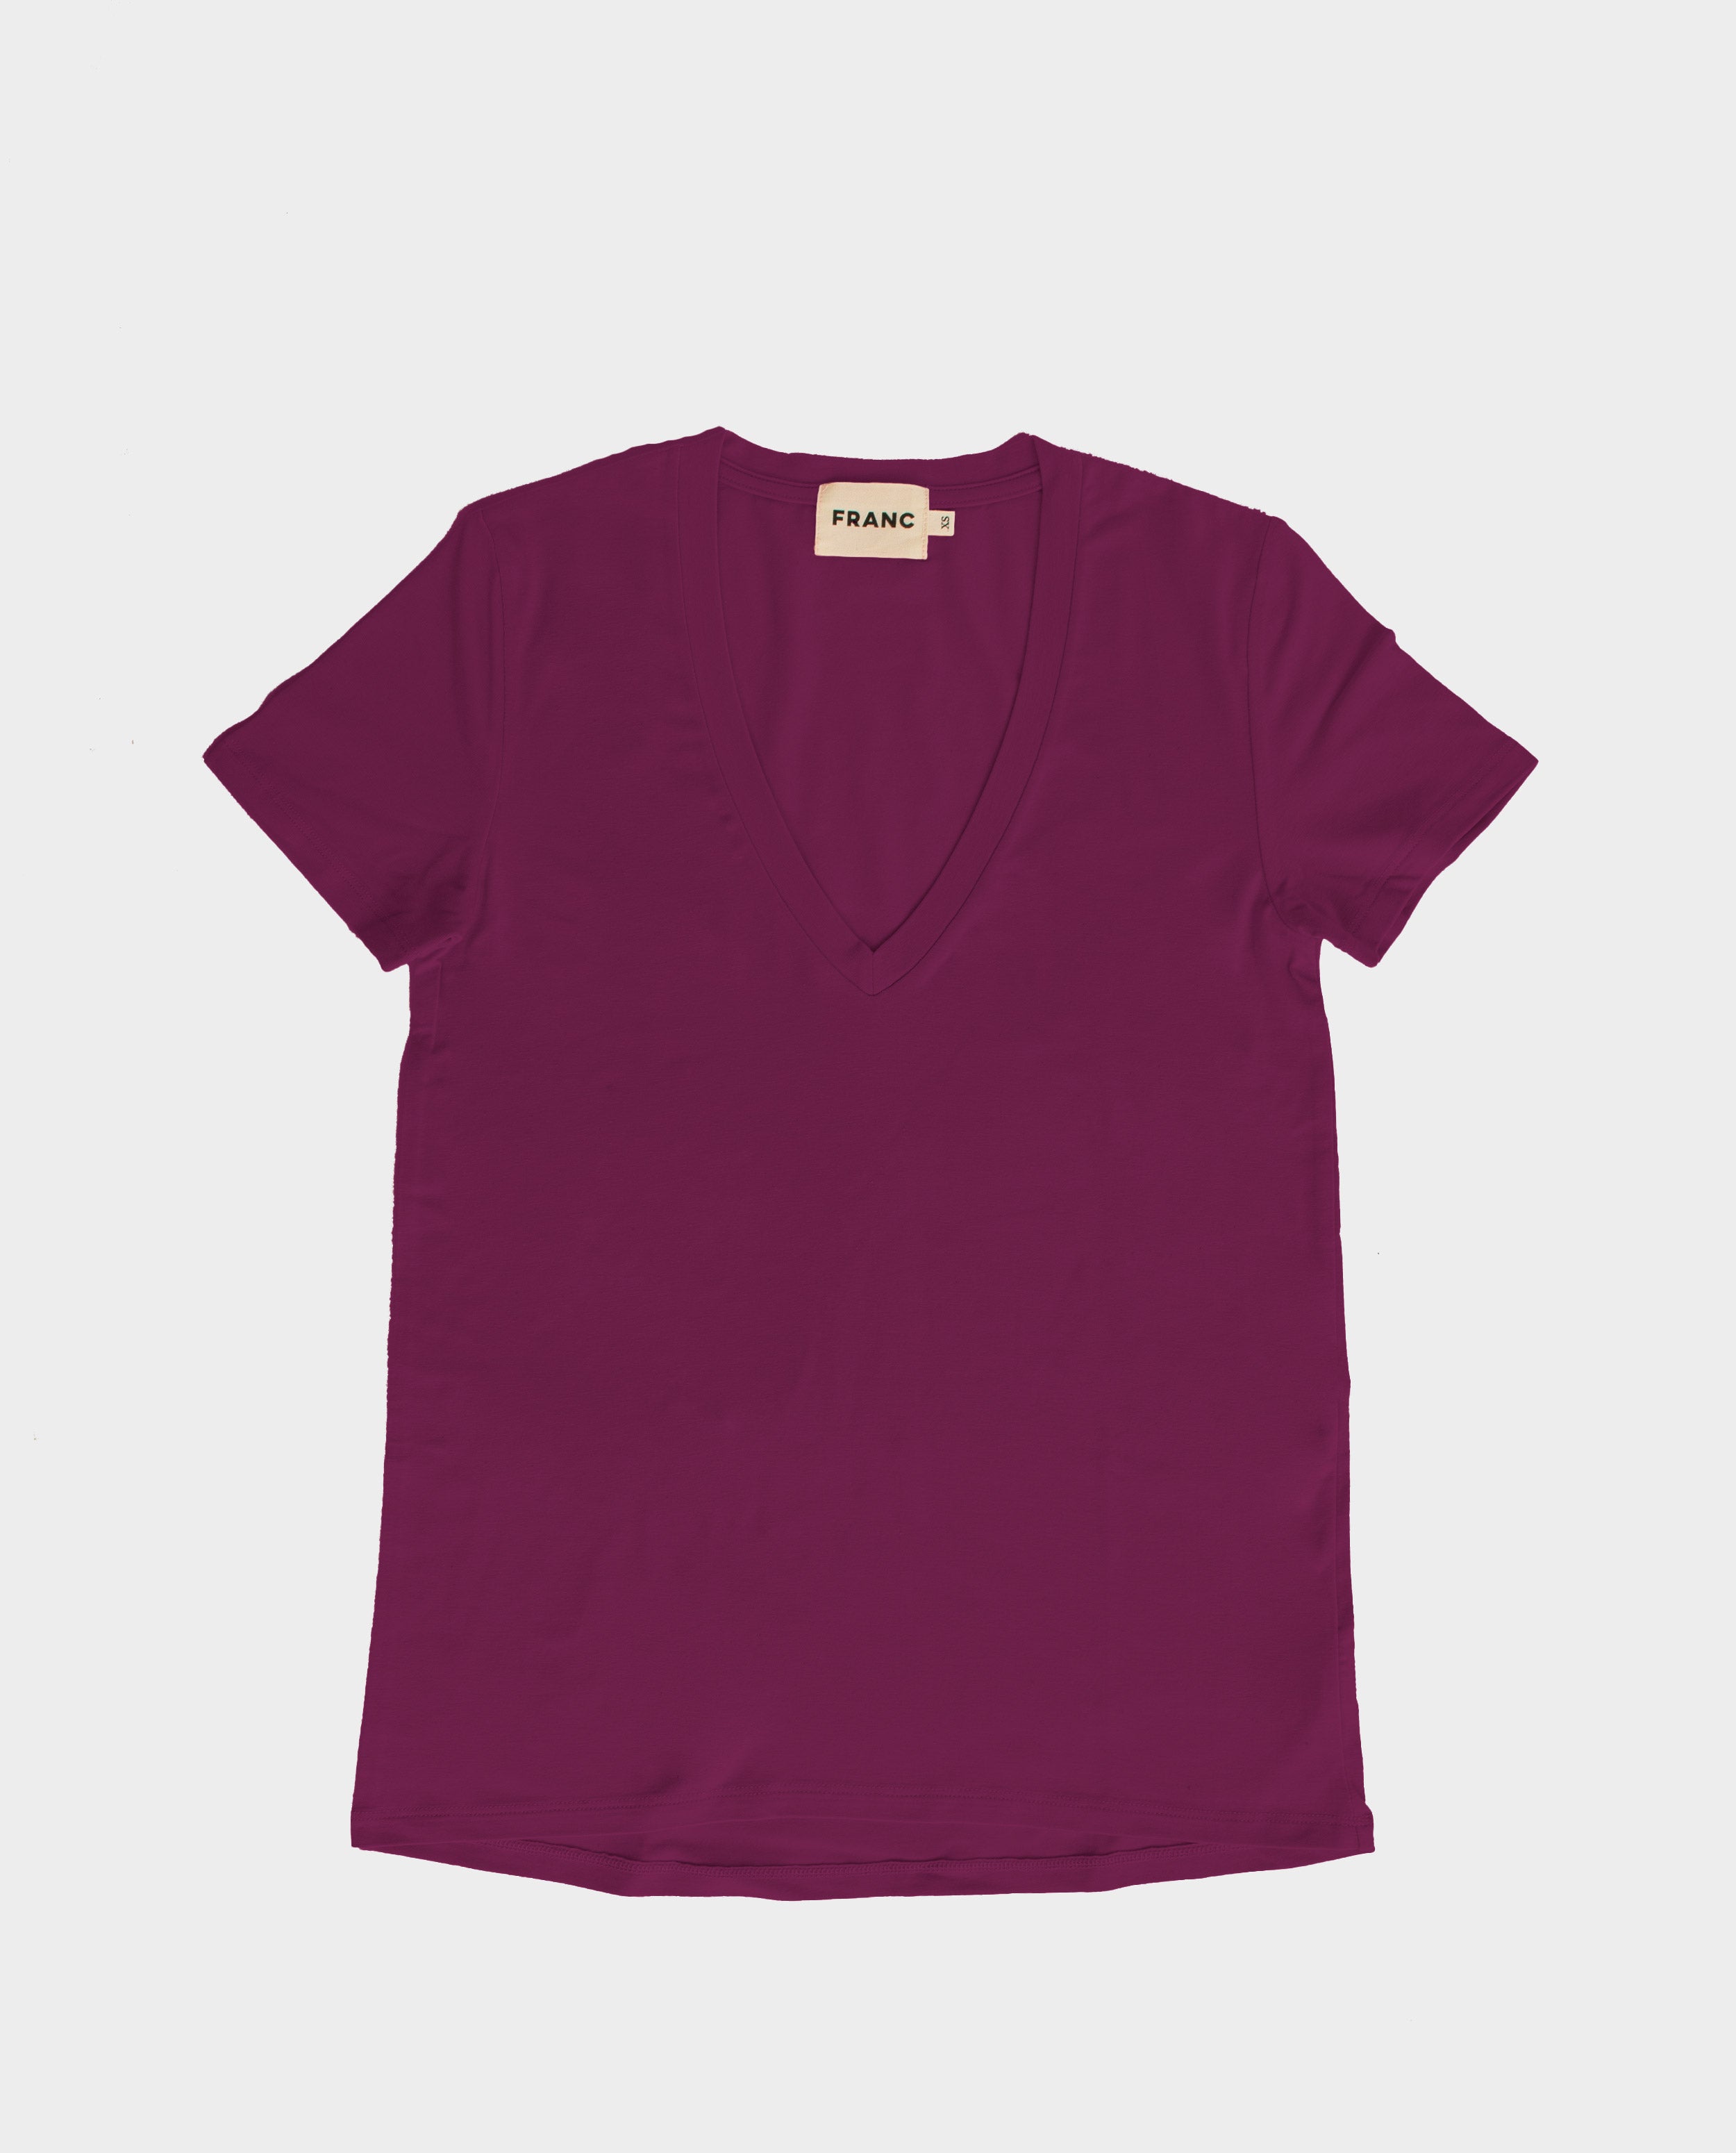 The V-Neck Tee in Poison | FRANC Sustainable Clothing